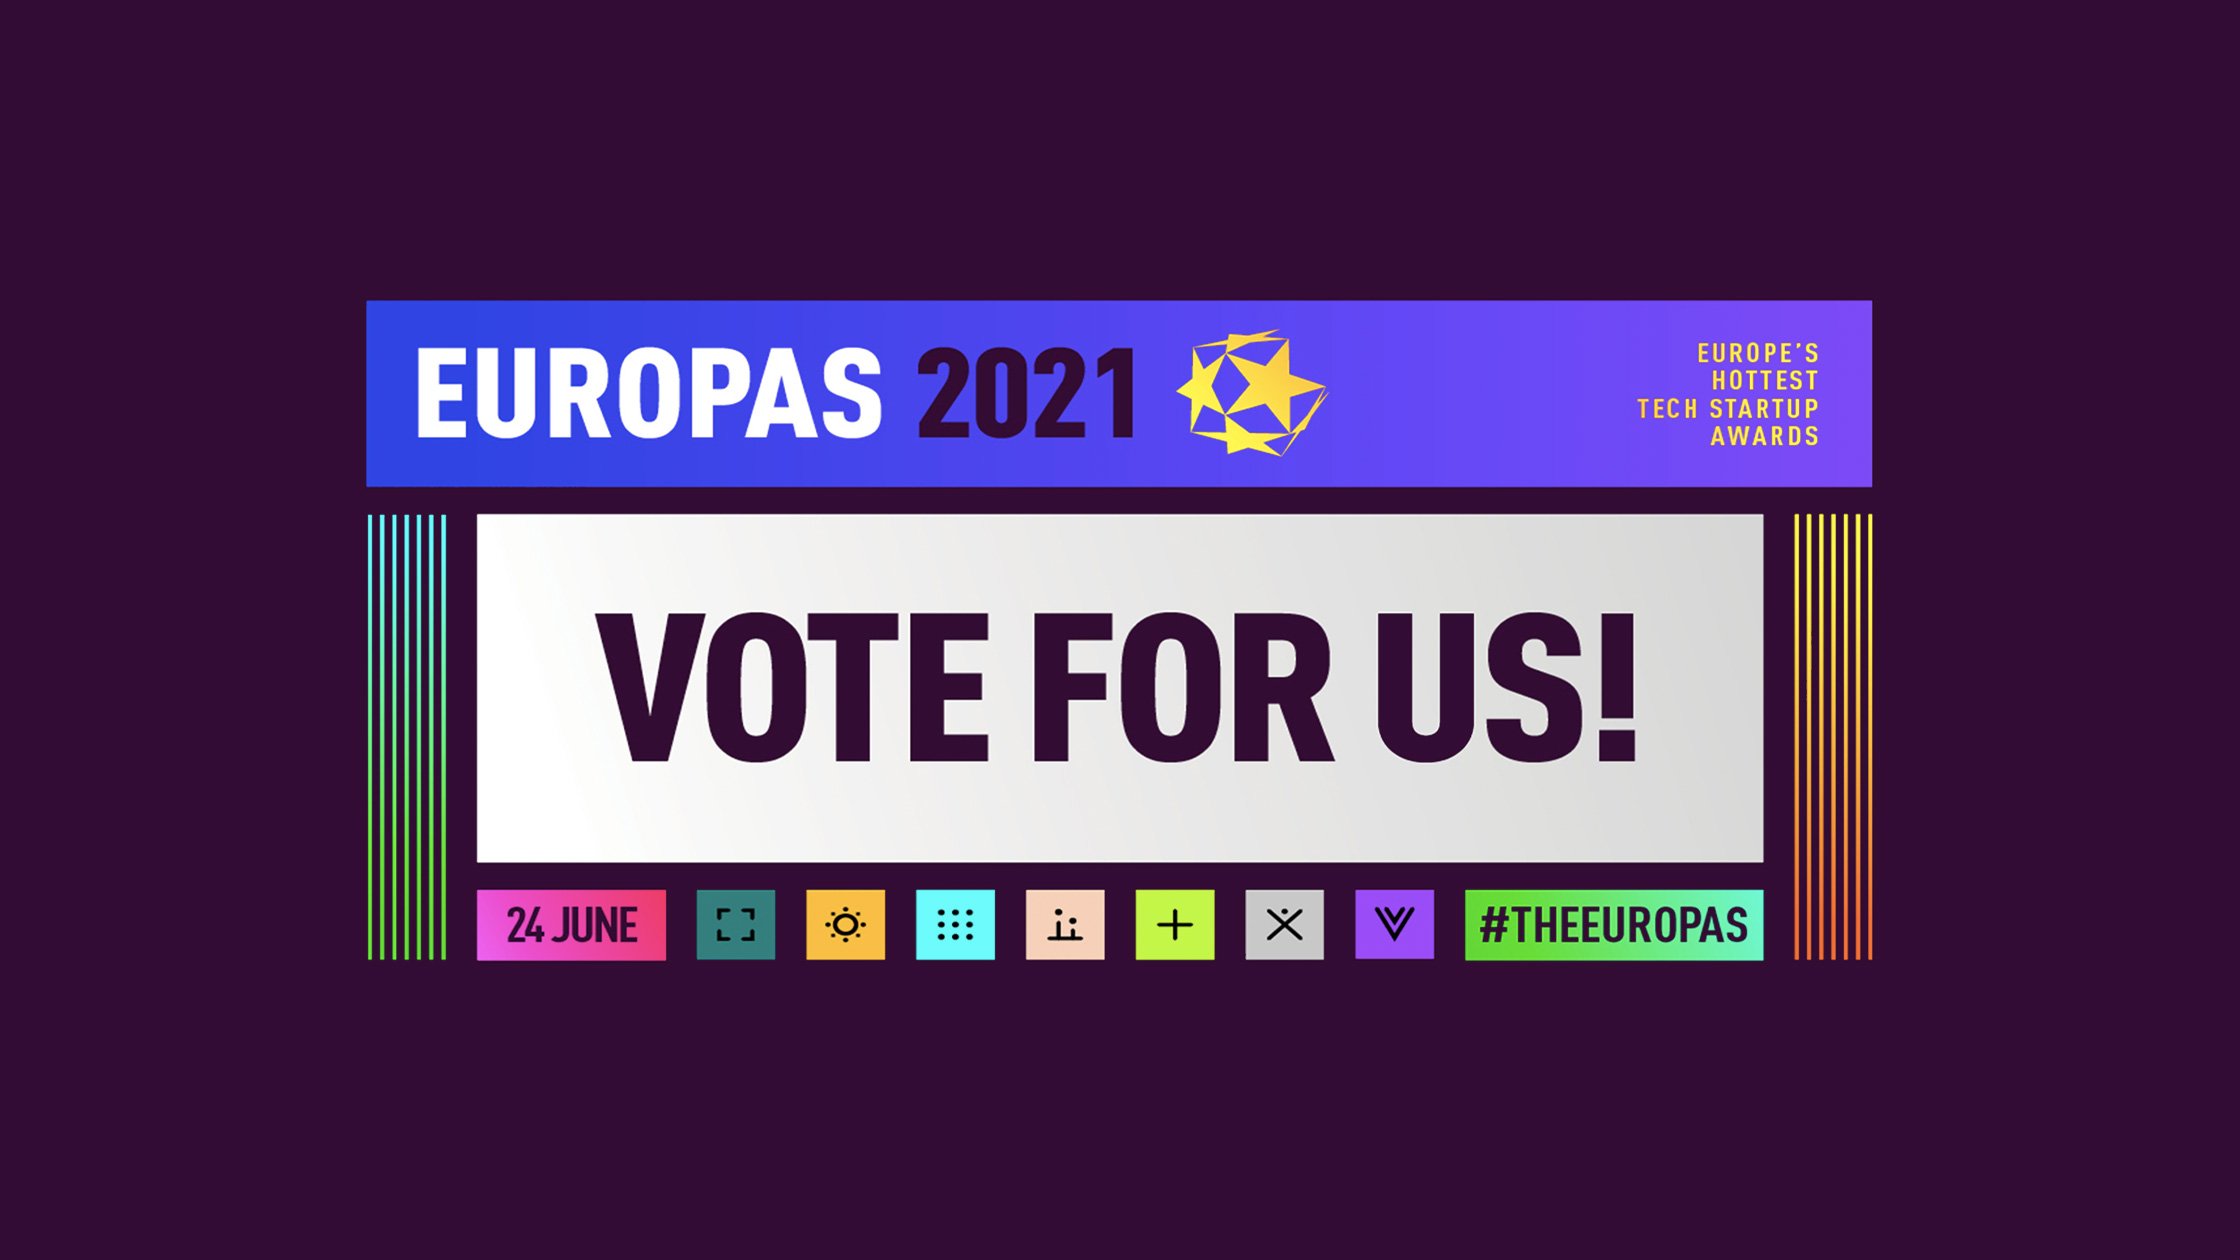 Vestd recognised by The Europas Tech Startup Awards 2021